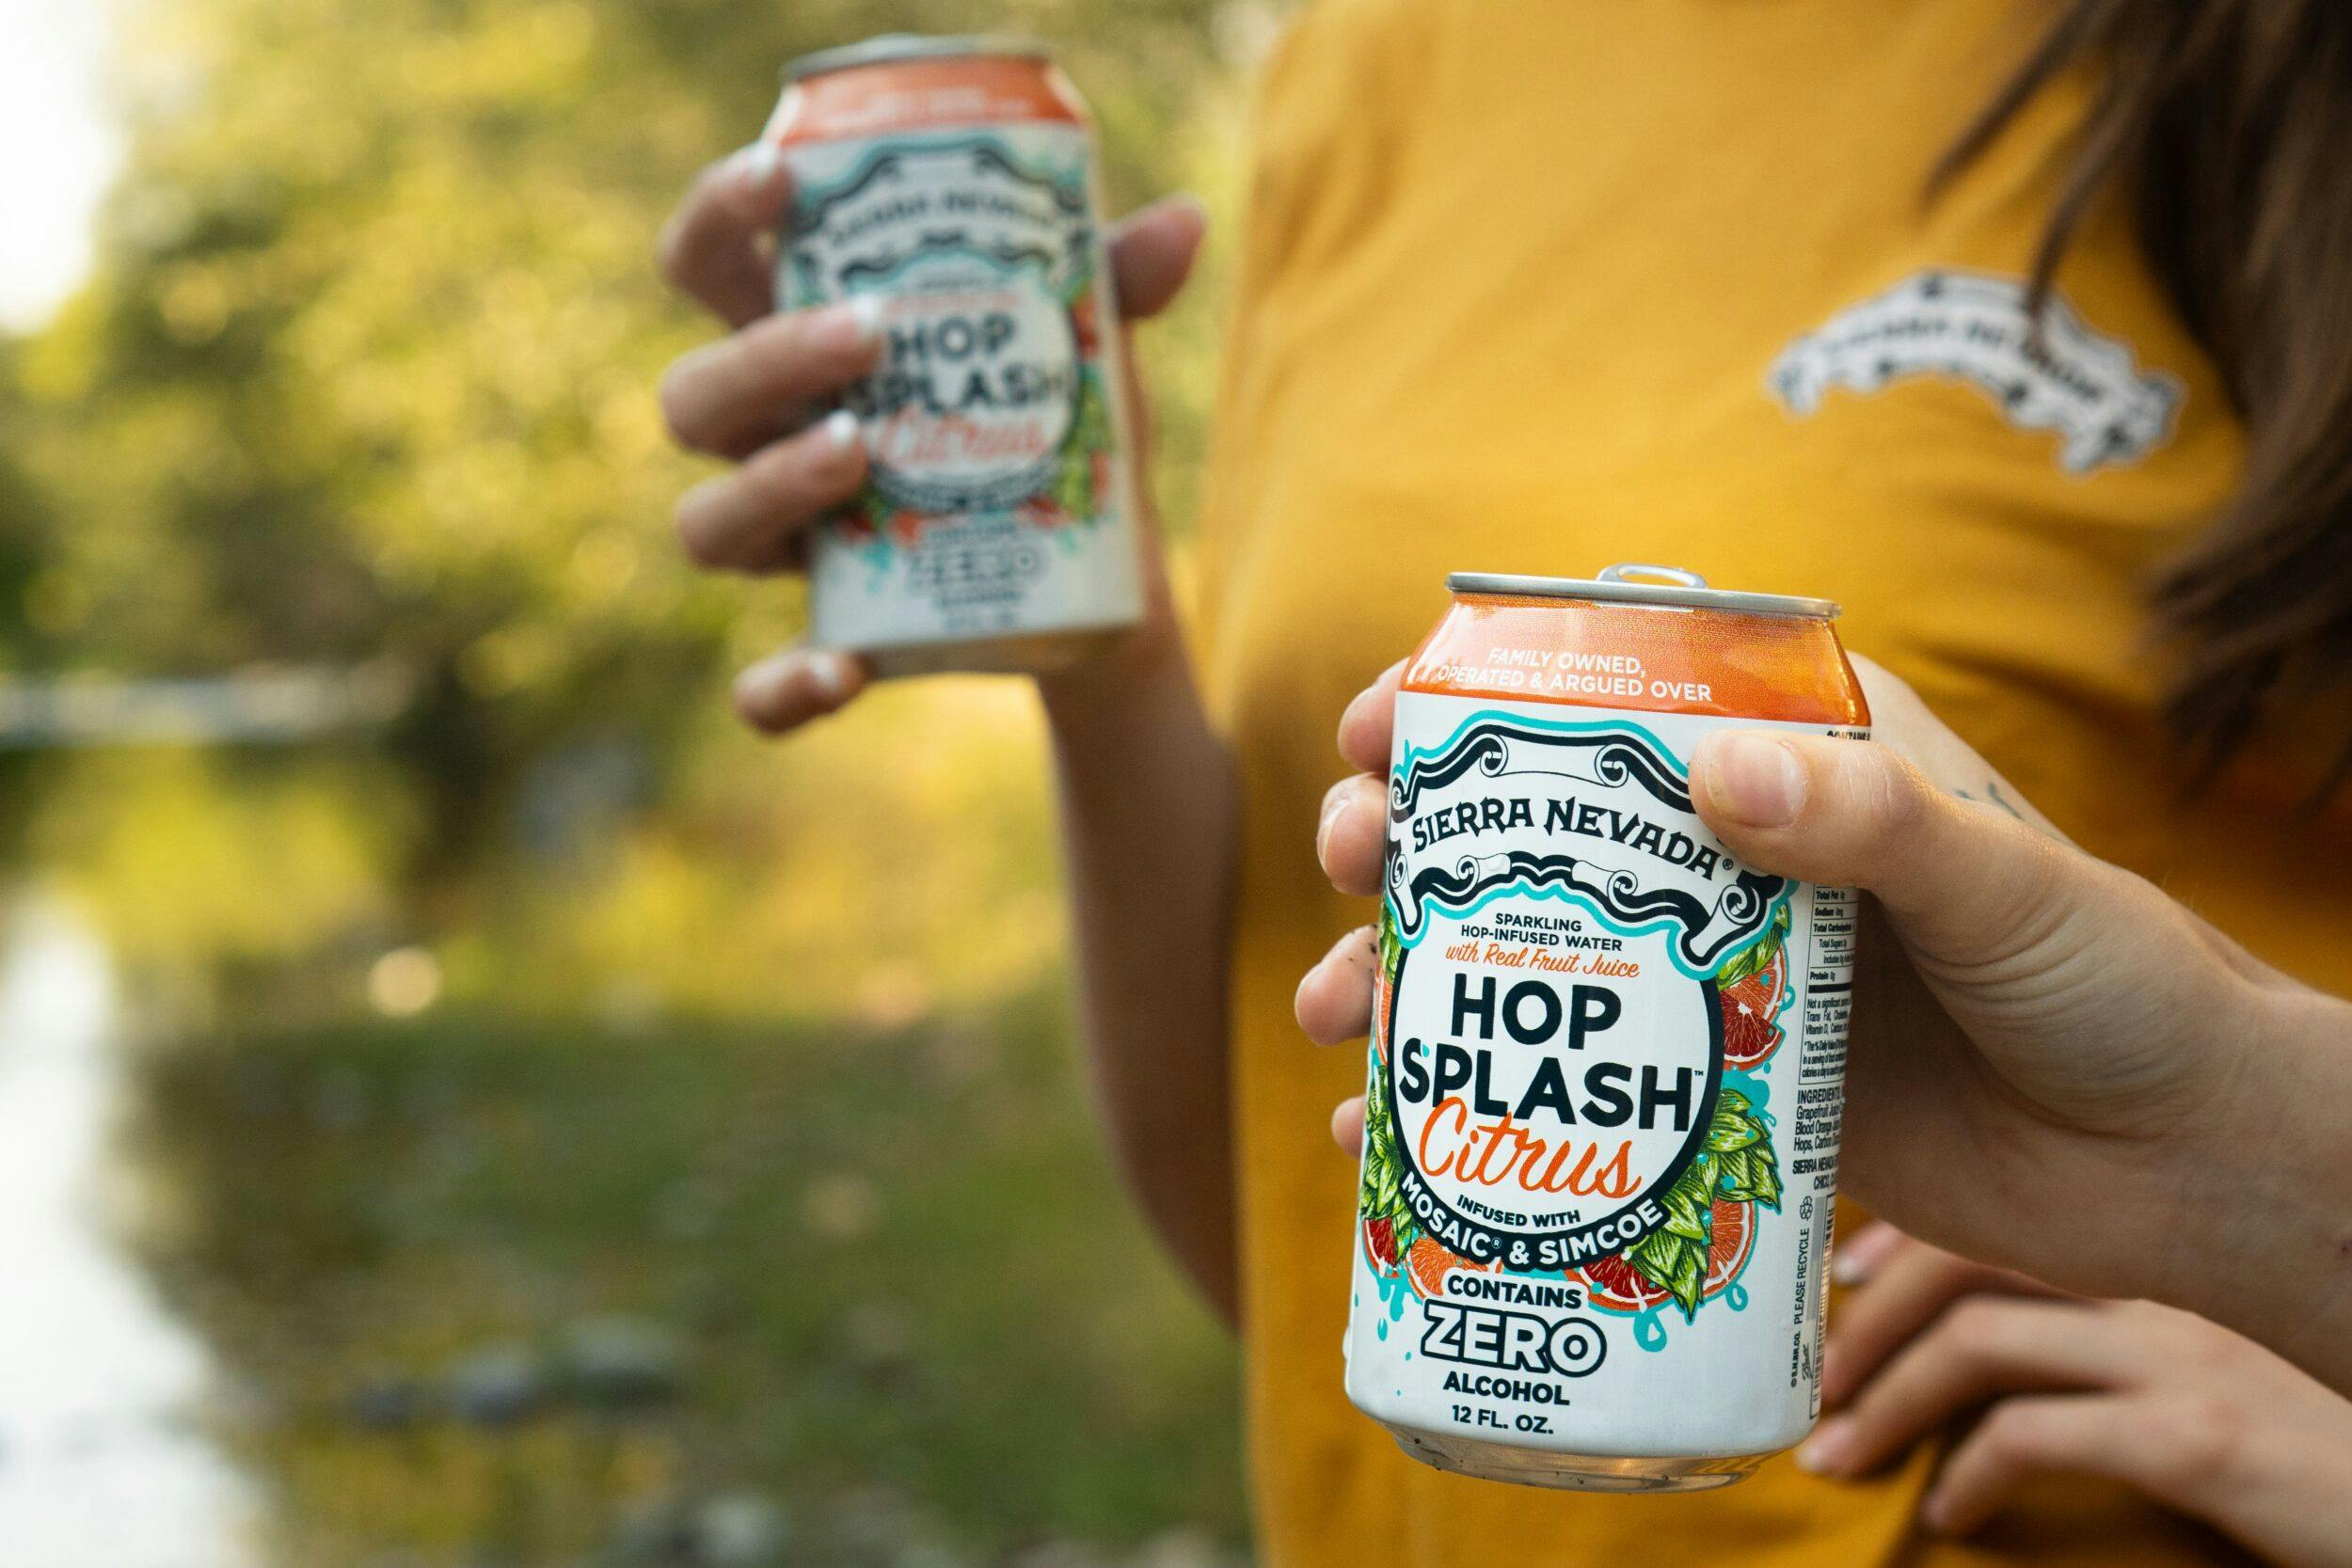 Two people, next to a creek, holding cans of Sierra Nevada Hop Splash Citrus